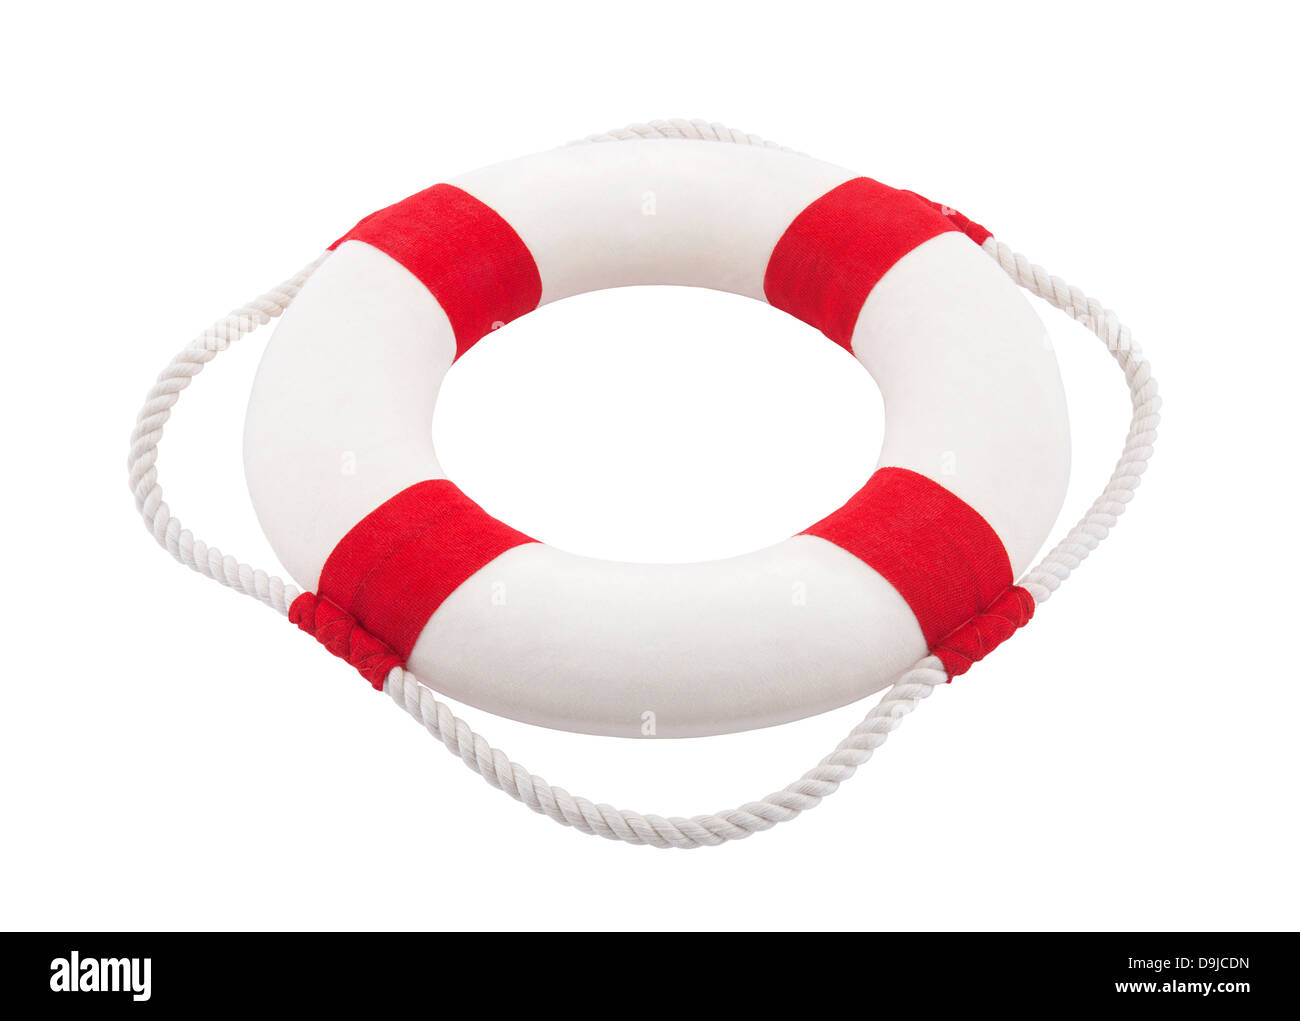 Lifebuoy with clipping path Stock Photo